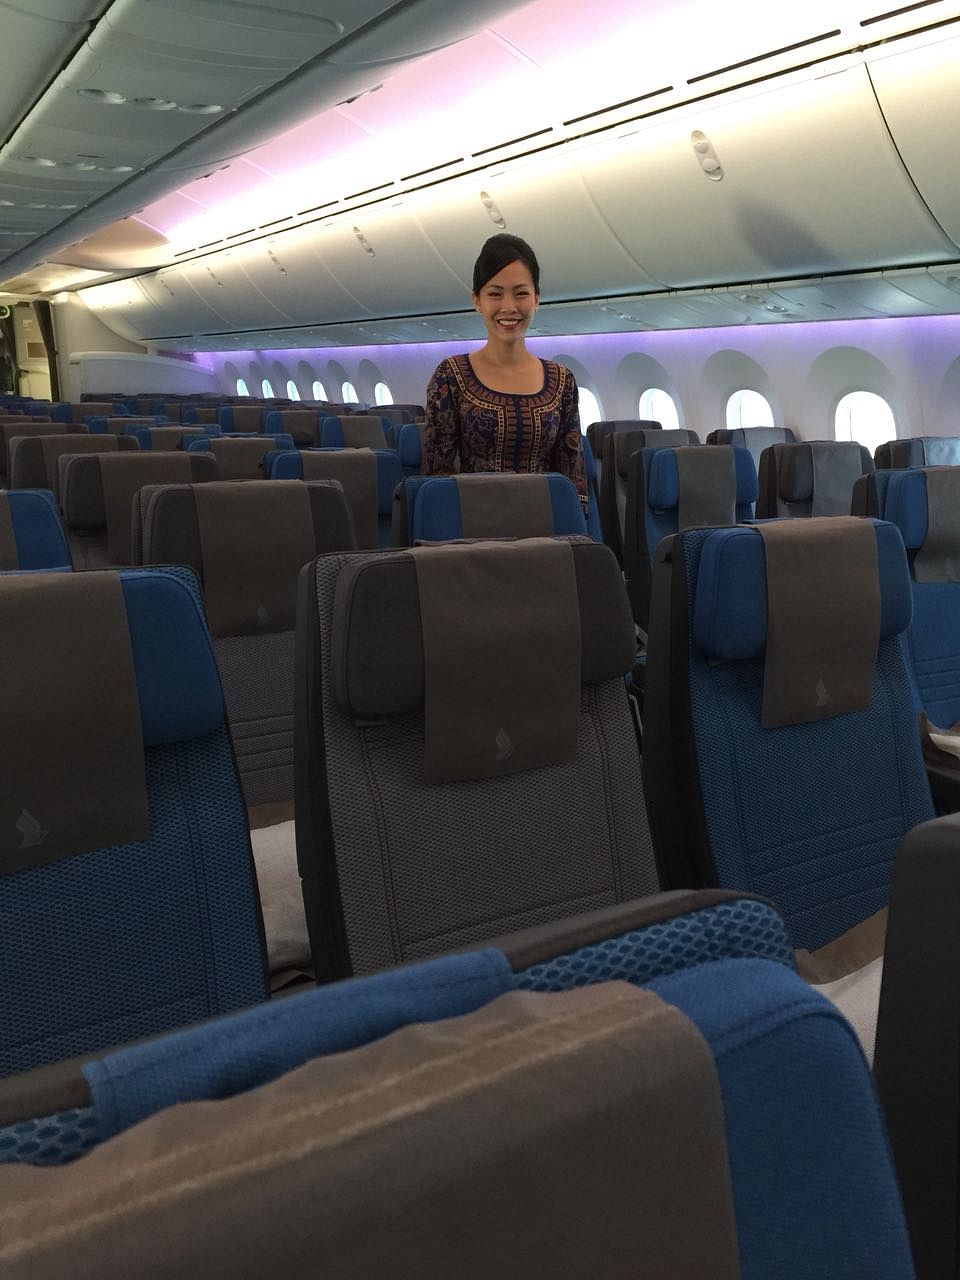 Singapore Airlines unveils the next generation of regional cabin products, fitted on its new Boeing 787-10 fleet.